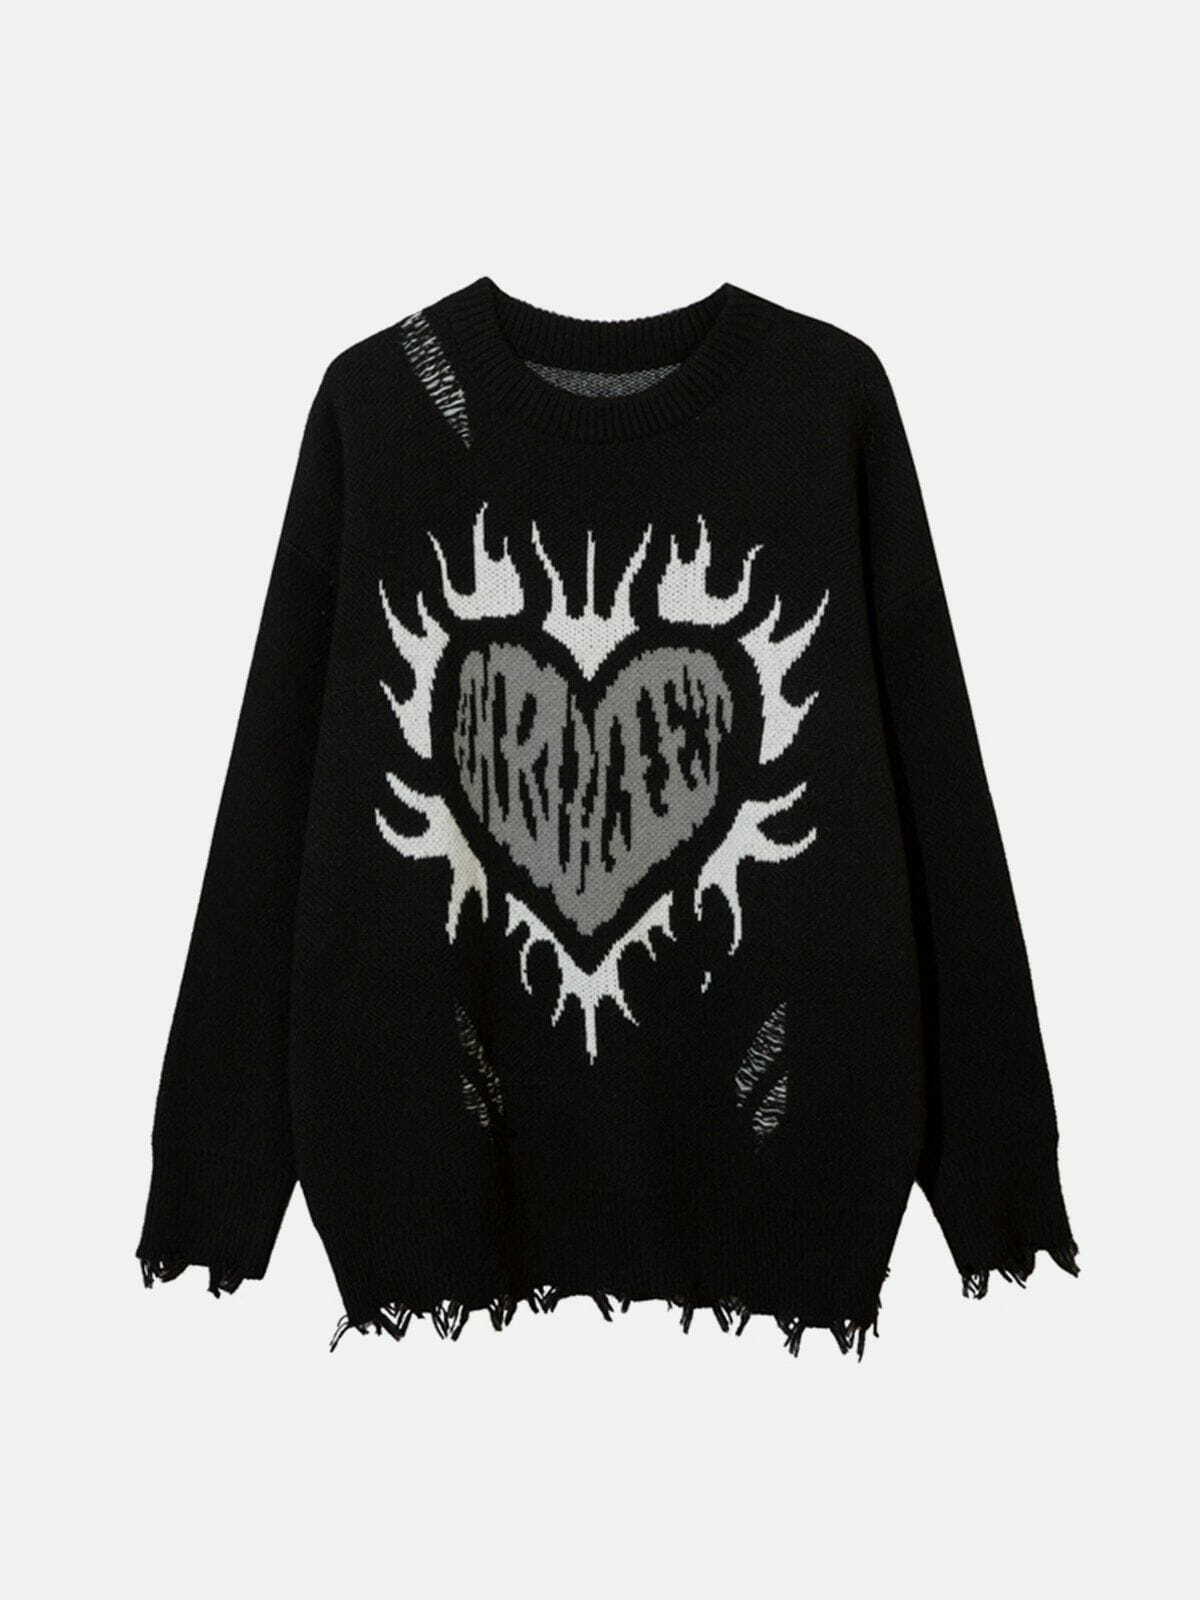 flame heart jacquard sweater edgy retro knitwear chic 3194